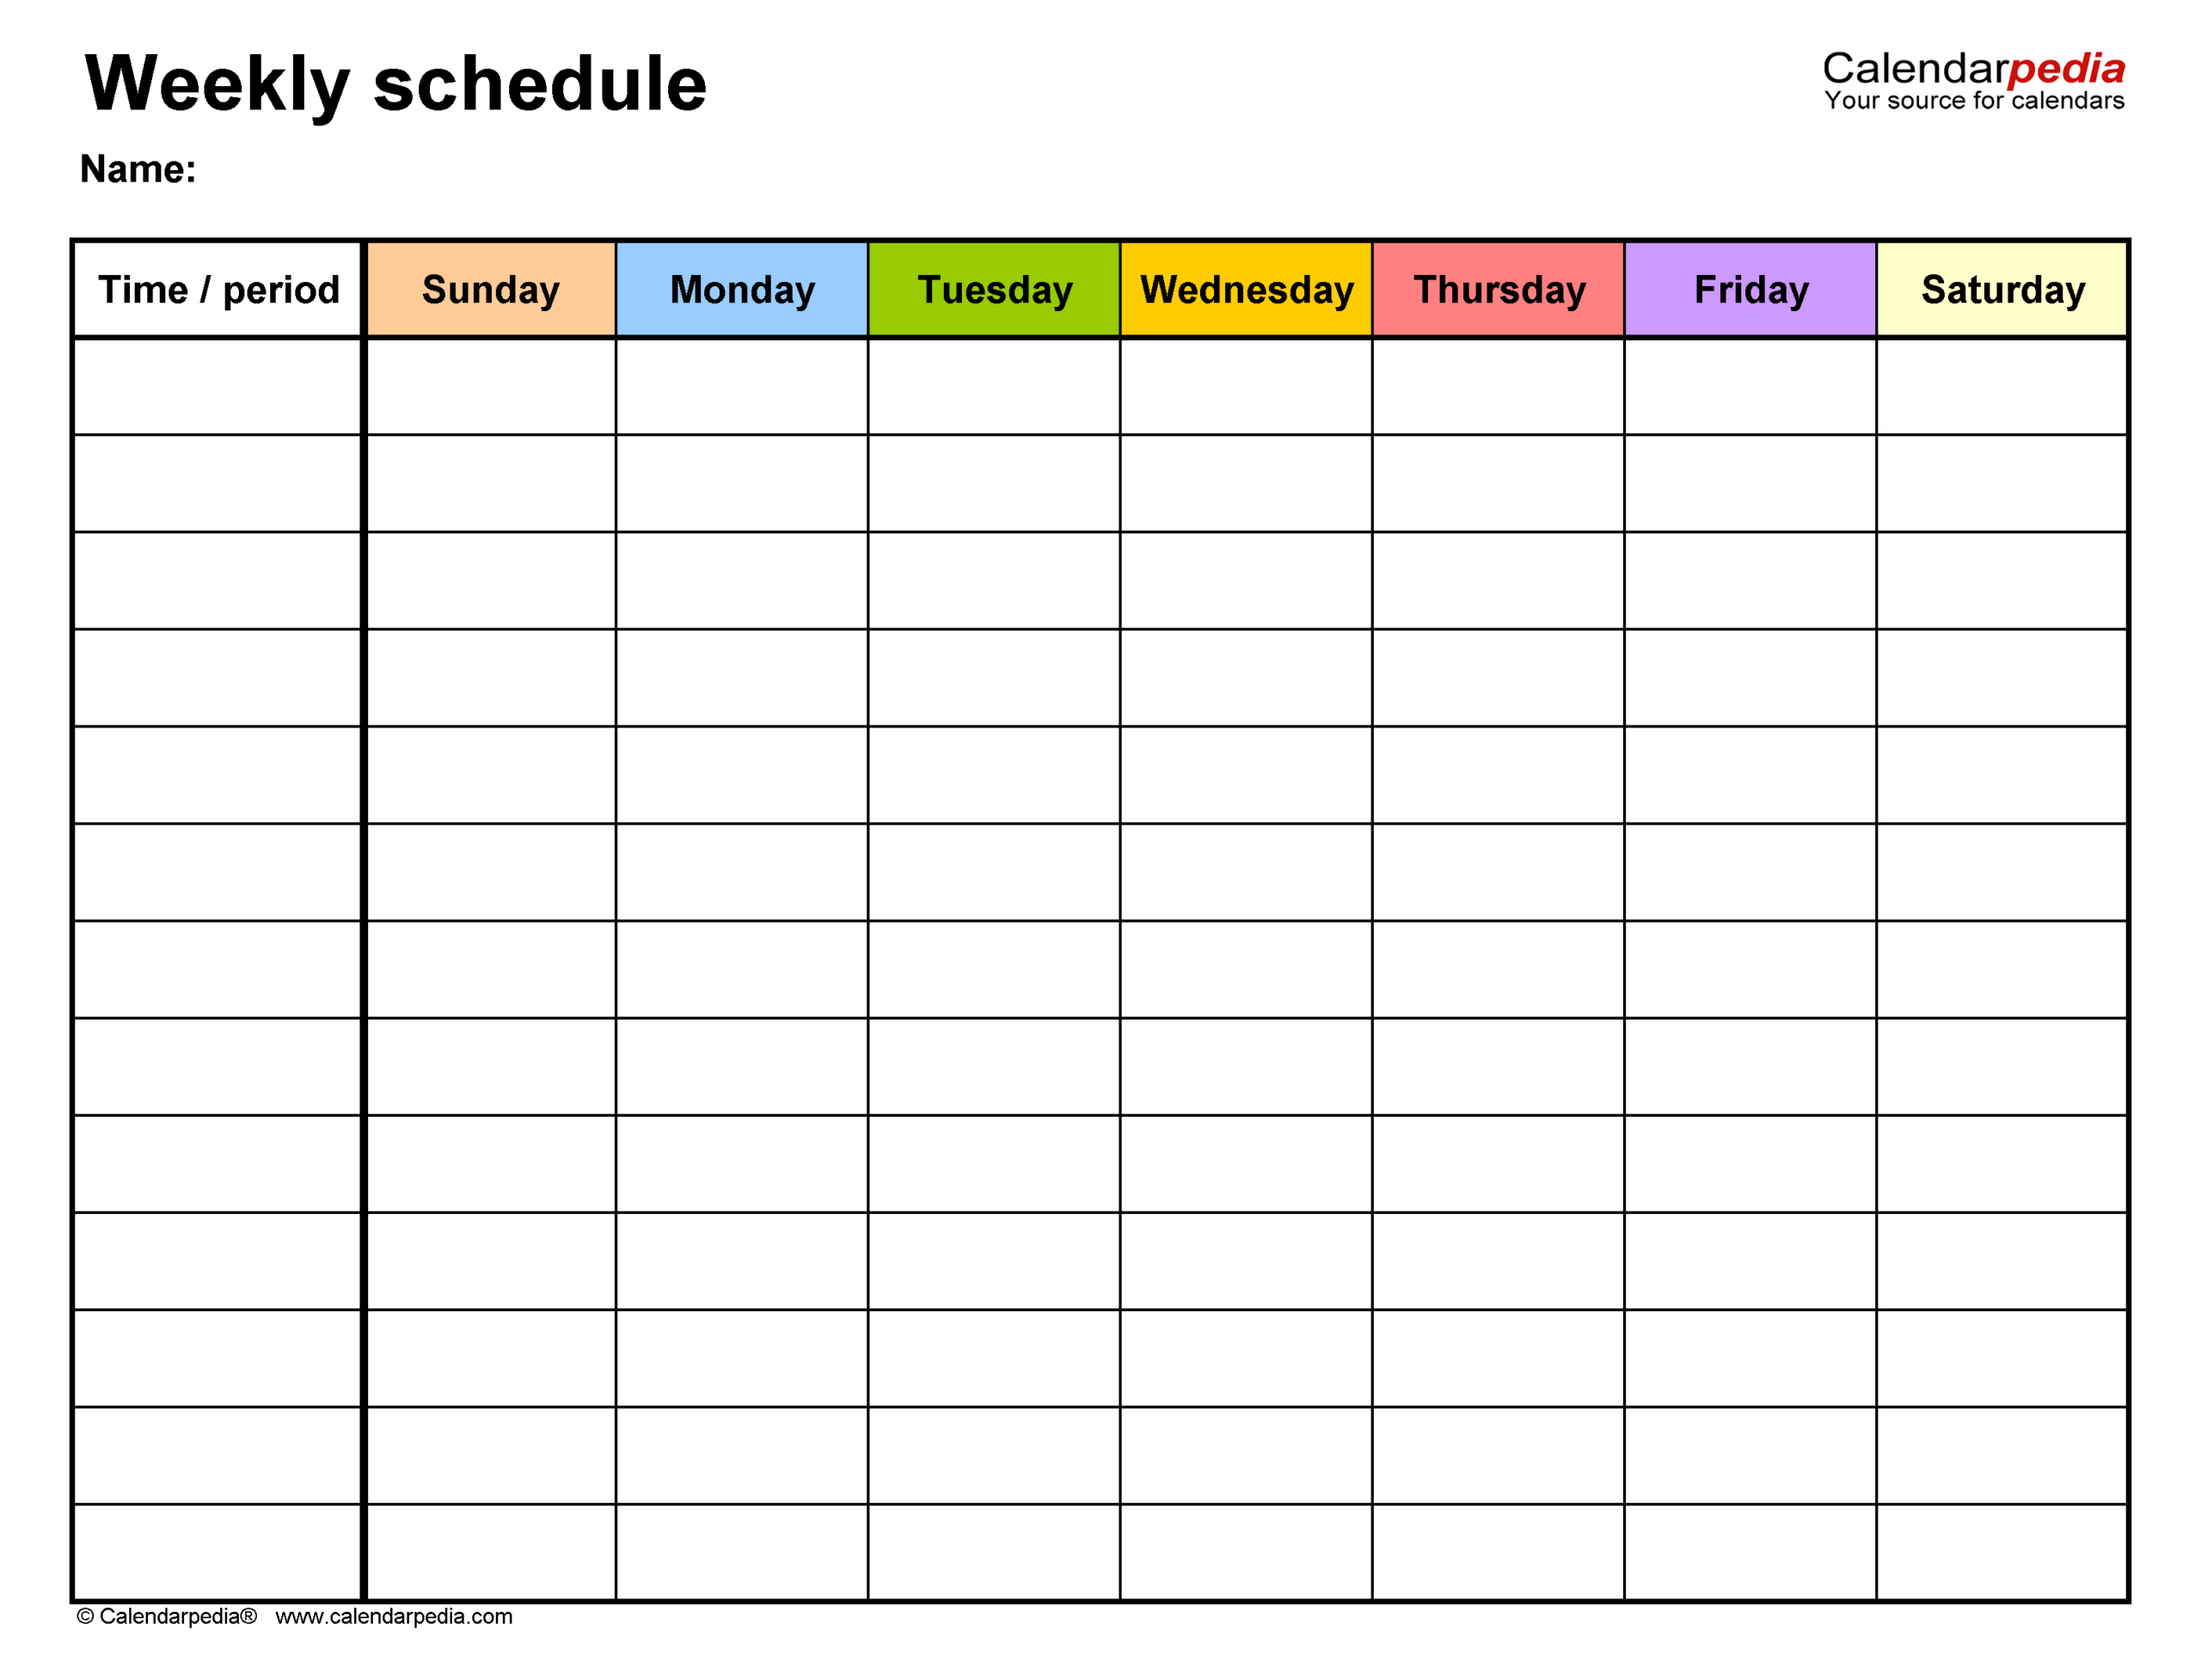 Free Weekly Schedules For Excel - 18 Templates